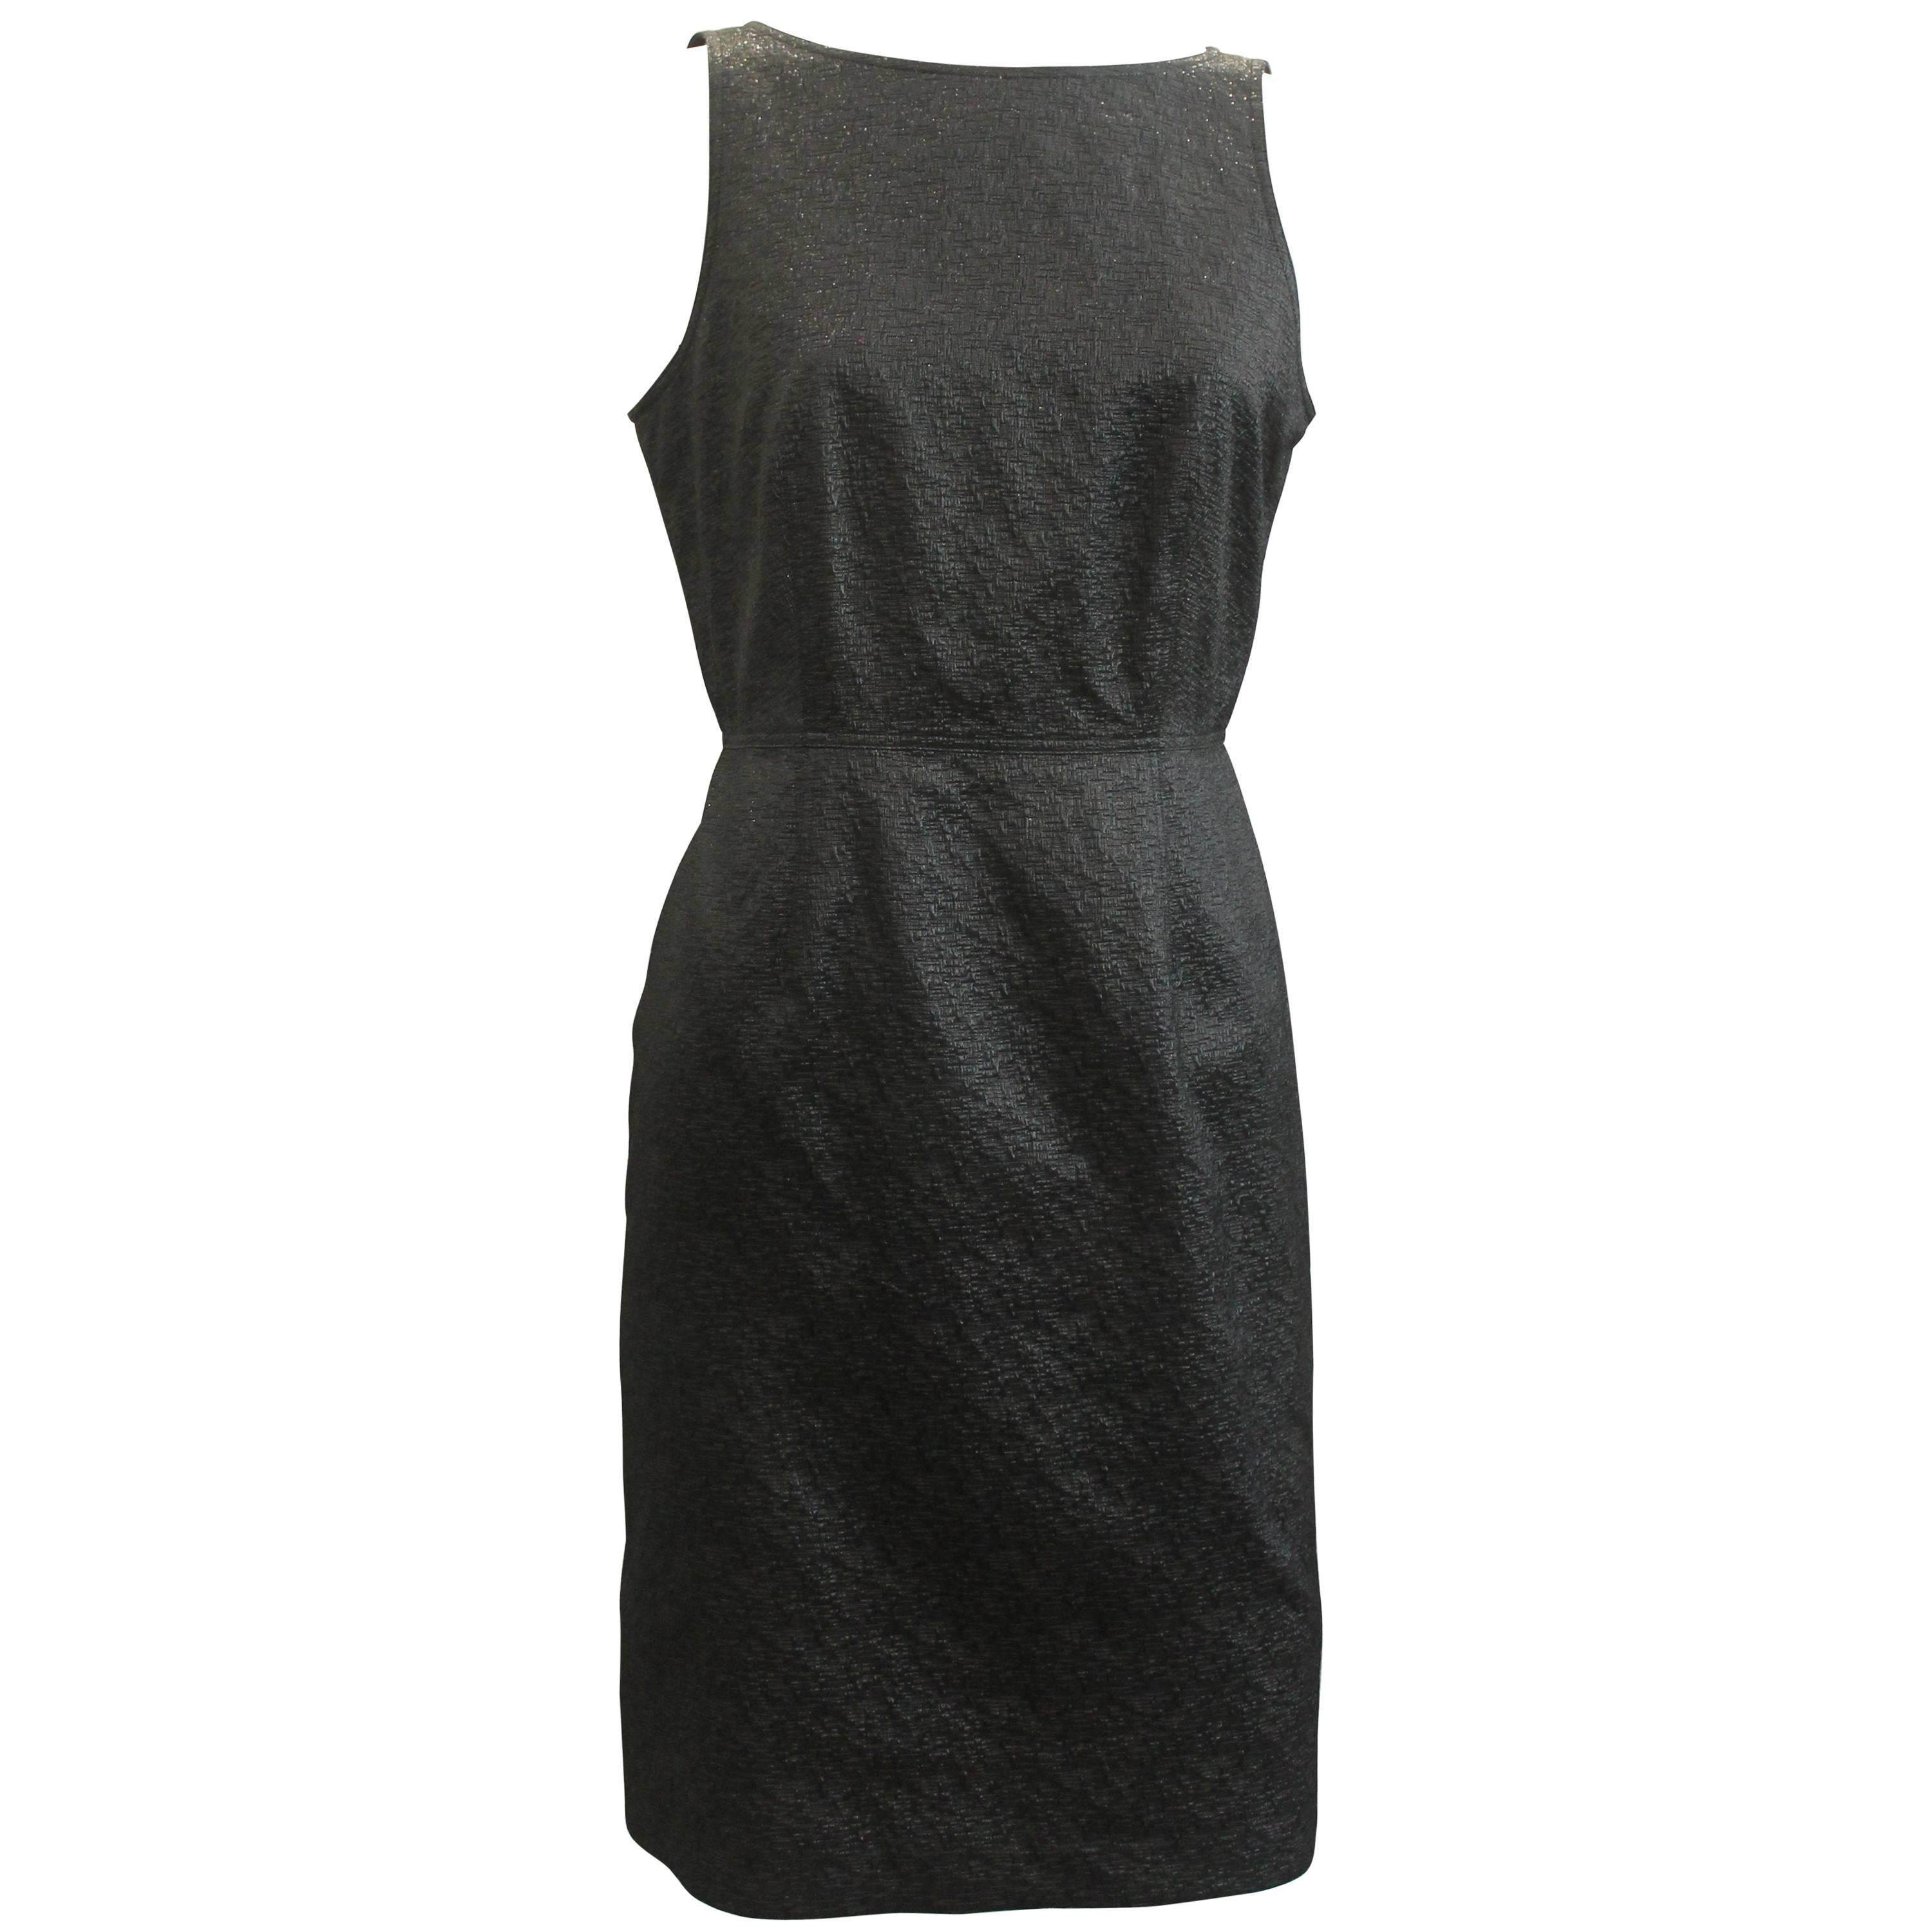 Burberry Sleeveless Fitted Metallic Charcoal Colored Polyester Brocade Dress - 6